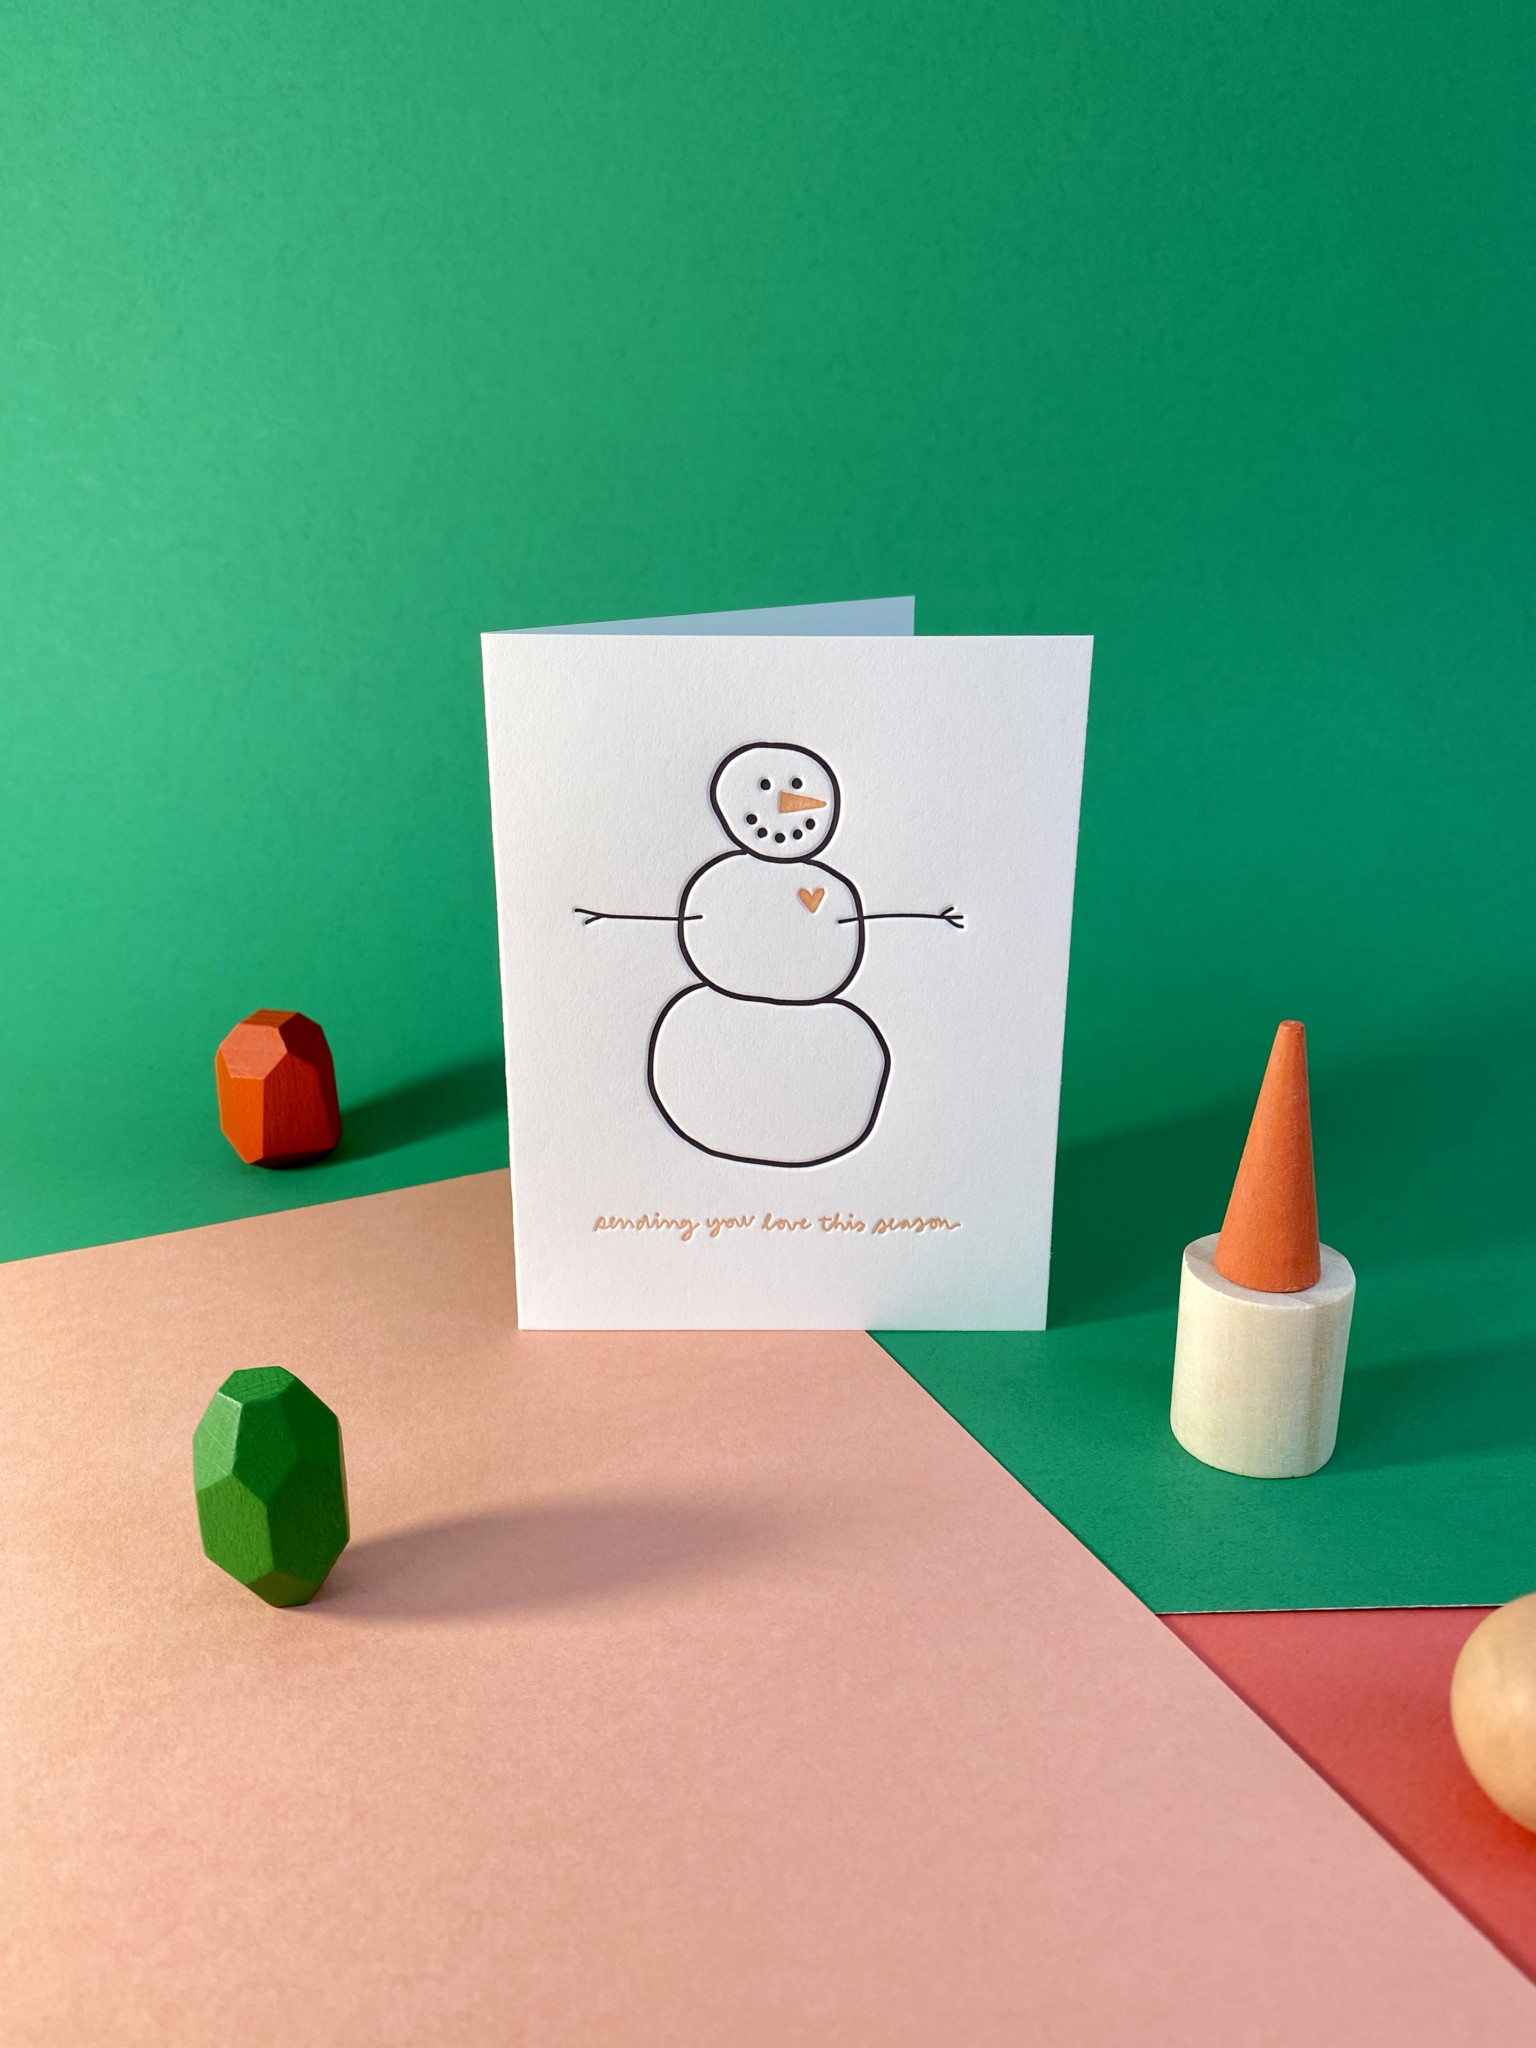 Greeting card with snowman sketch reads, "sending you love this season"